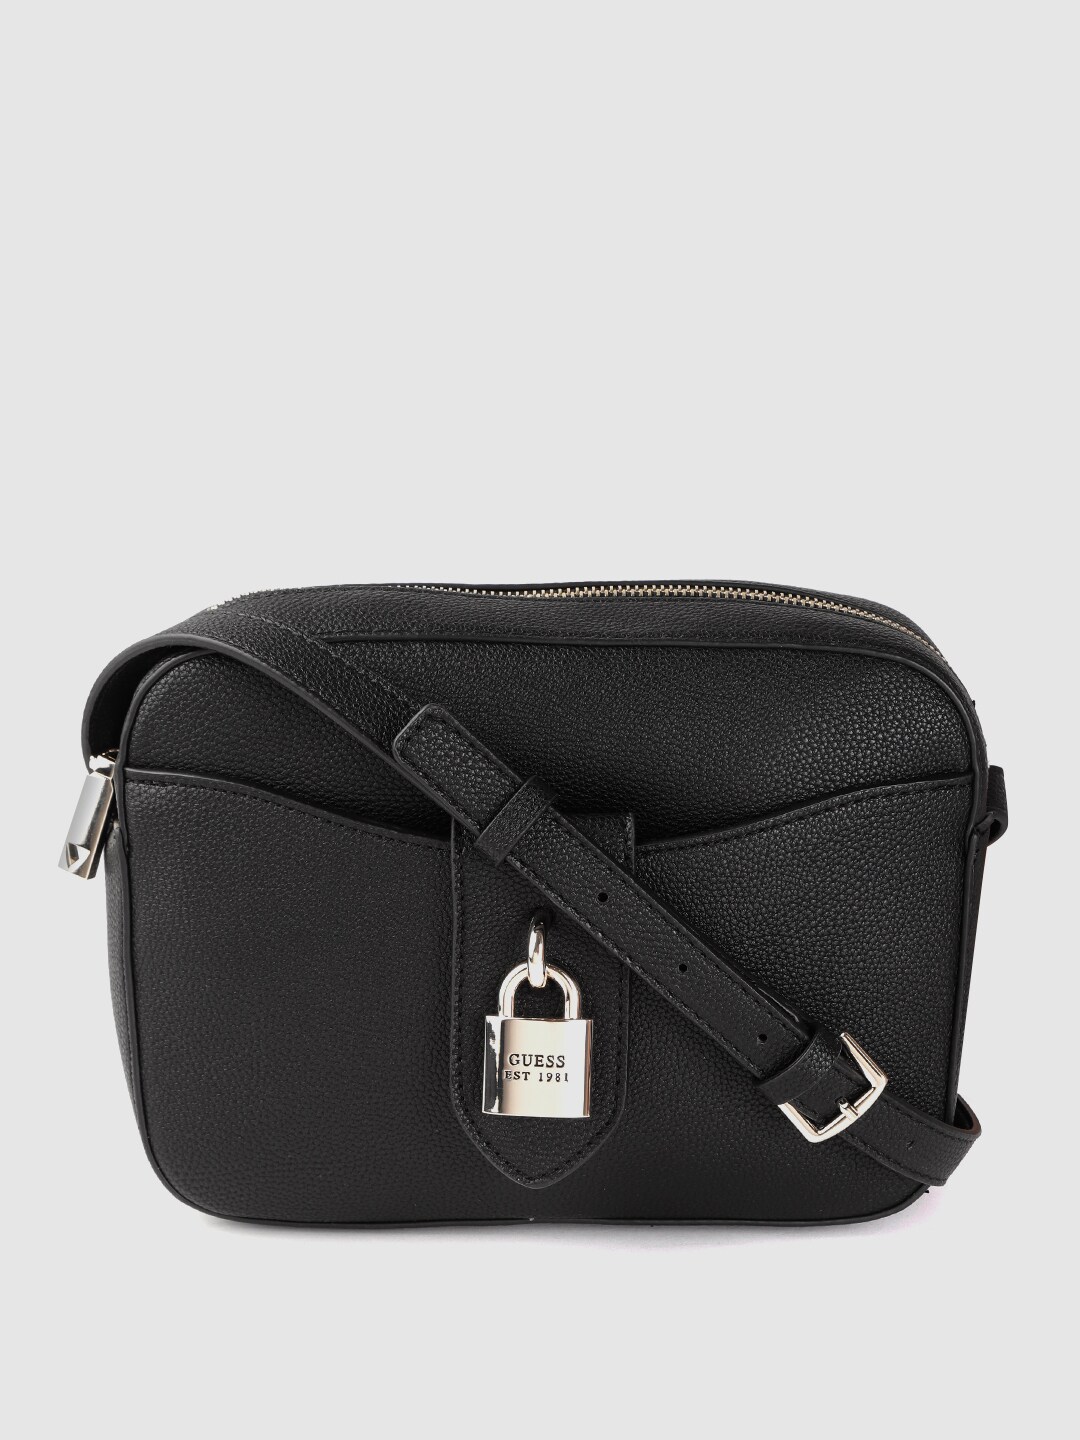 GUESS Women Black Solid Structured Sling Bag Price in India